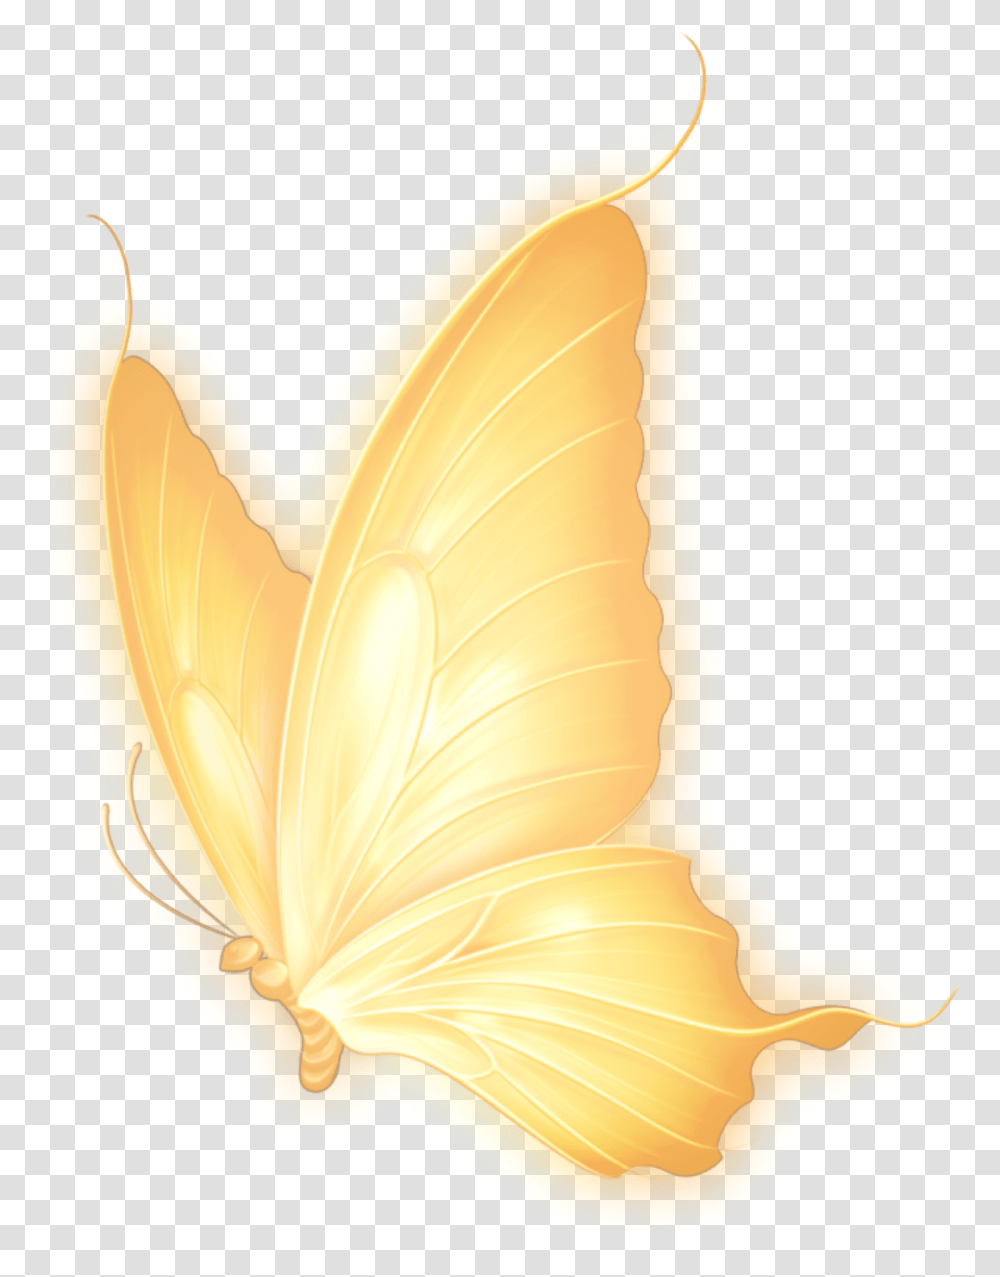 Trending Yellow Butterfly Aesthetic Neon, Invertebrate, Animal, Insect, Banana Transparent Png